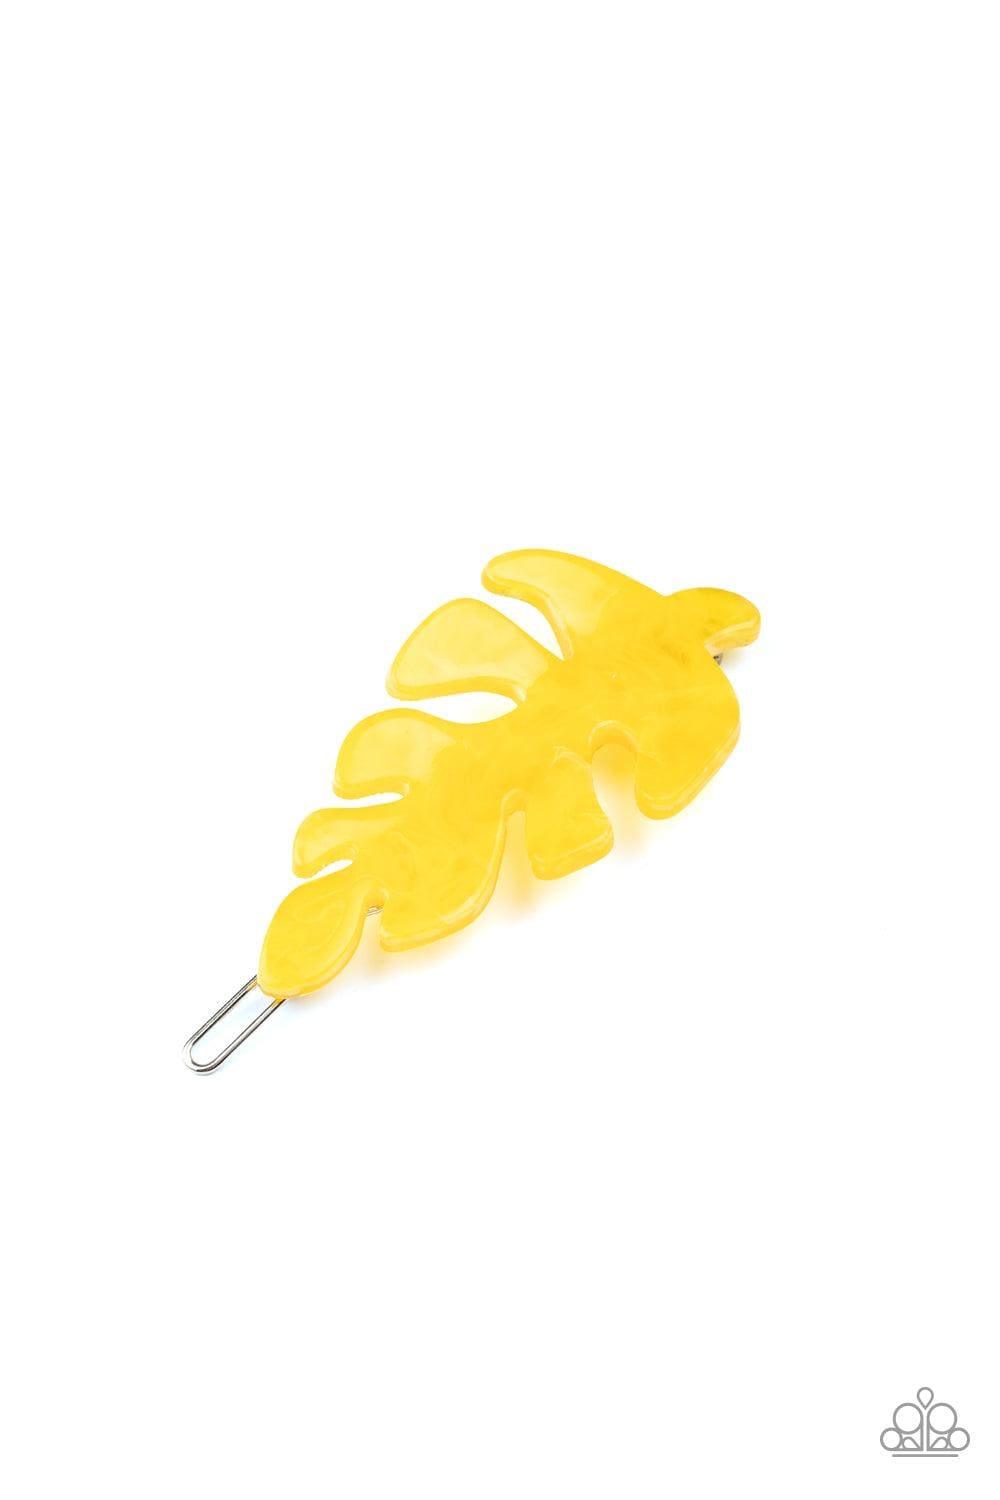 Paparazzi Accessories - Leaf Your Mark - Yellow Hair Clip - Bling by JessieK